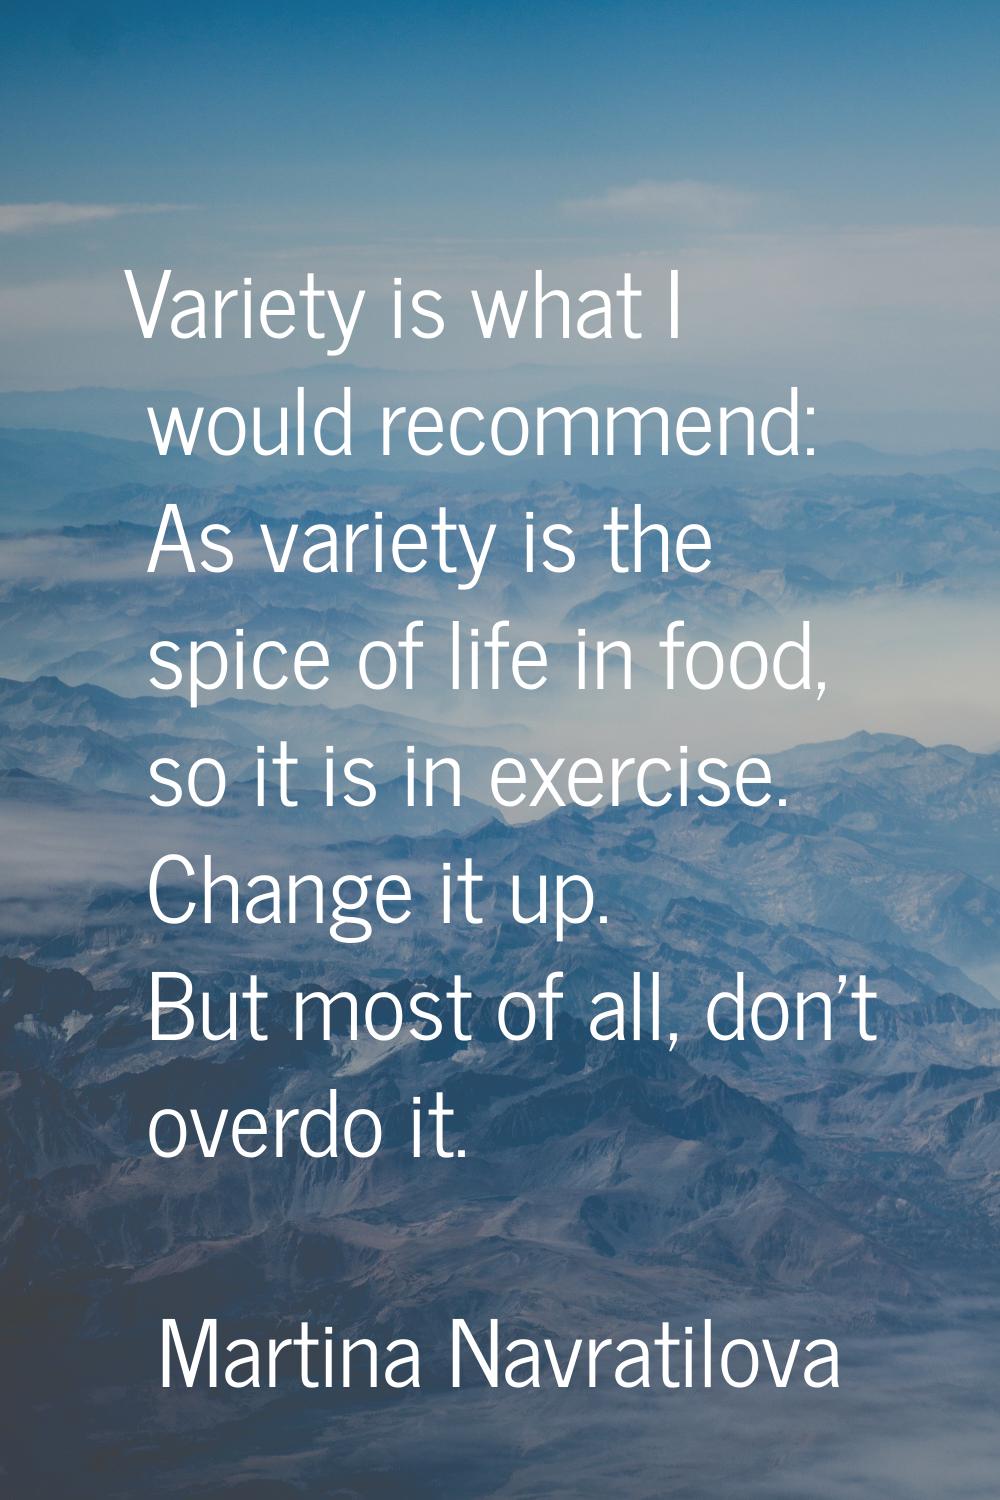 Variety is what I would recommend: As variety is the spice of life in food, so it is in exercise. C